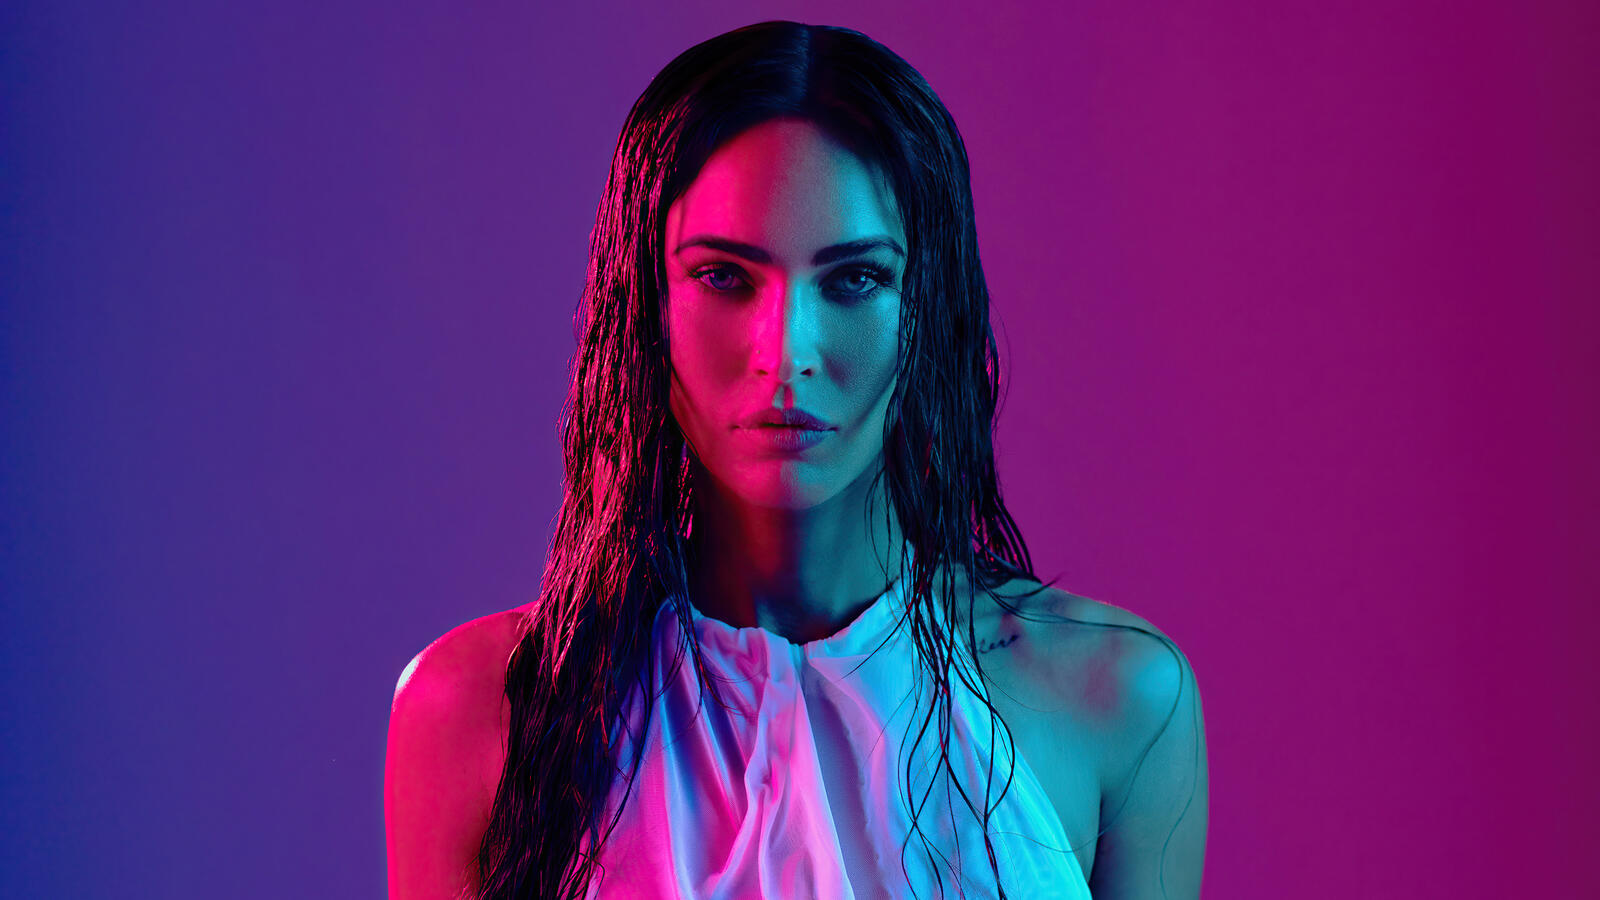 Free photo Megan Fox on color background